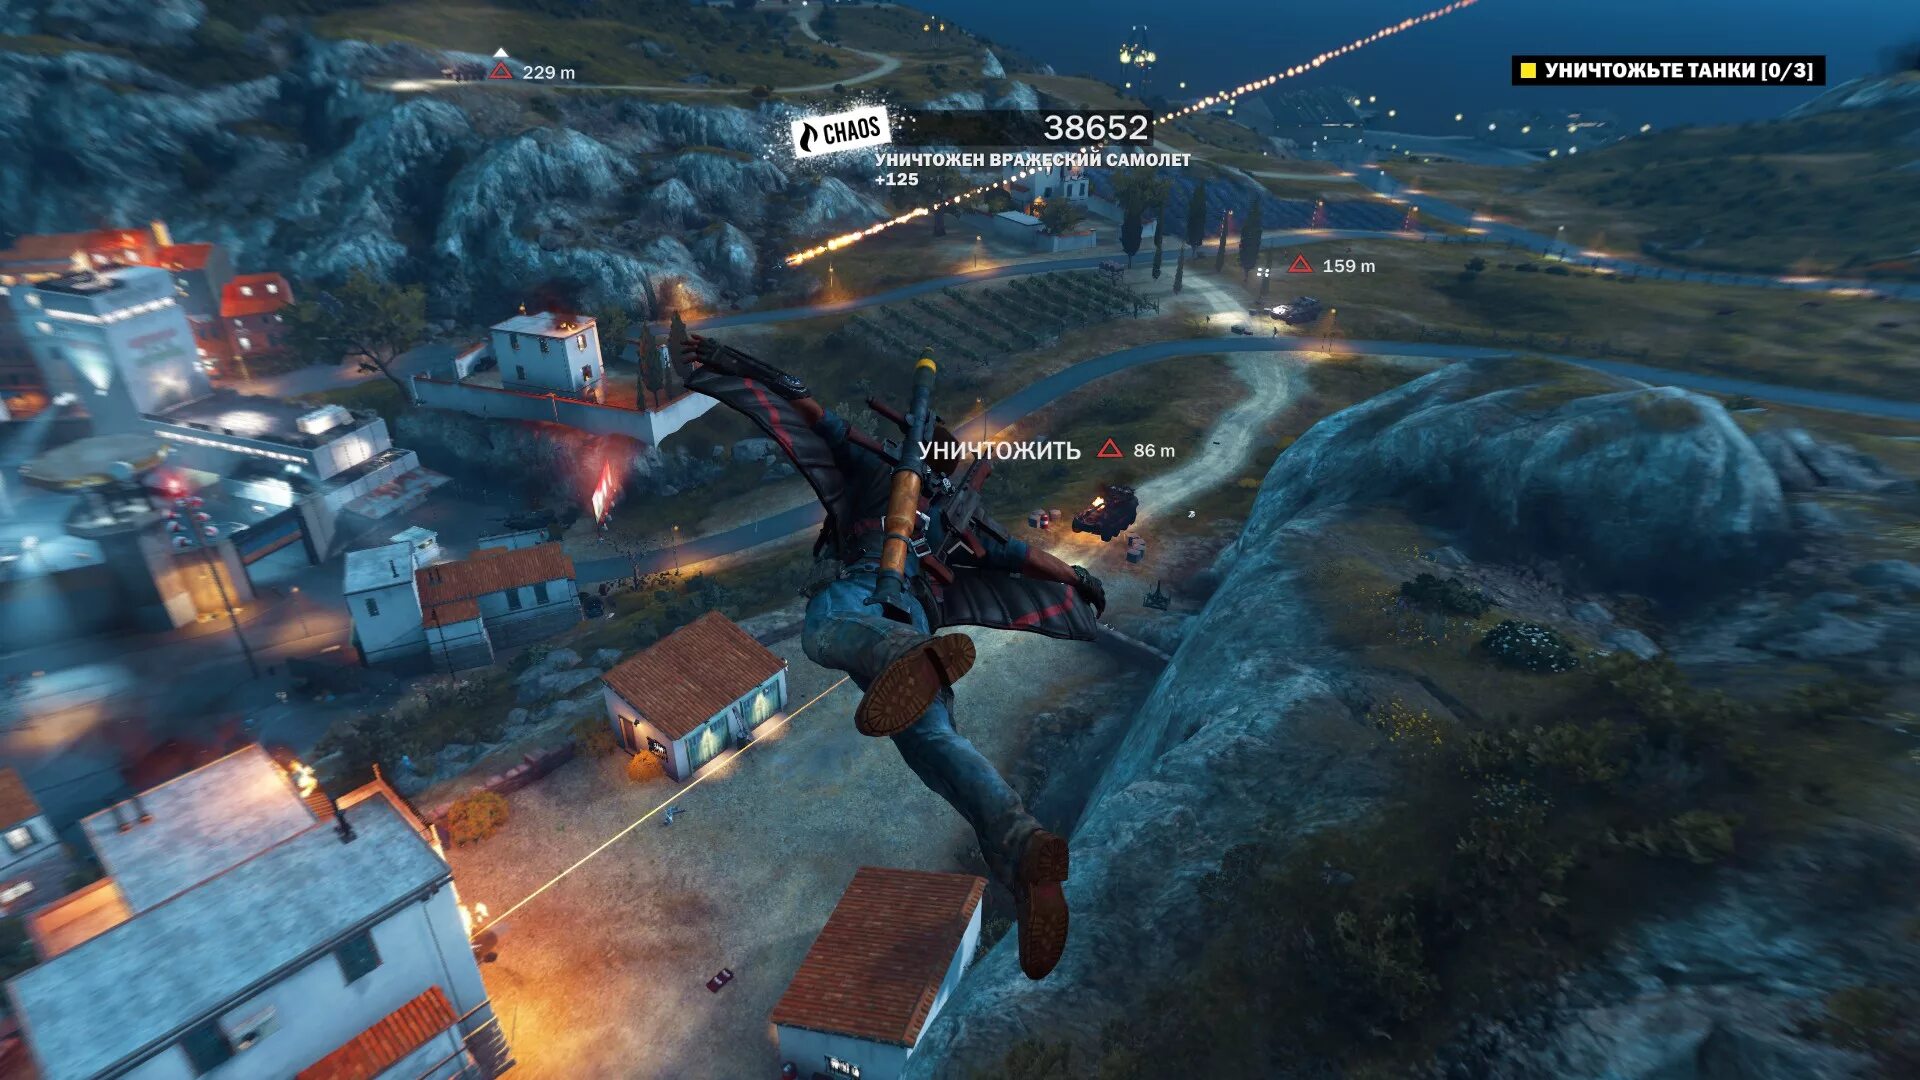 Игра just cause 3. Just cause игра 5. Just cause 3 полное издание. Just cause игра 1. Only 3 games